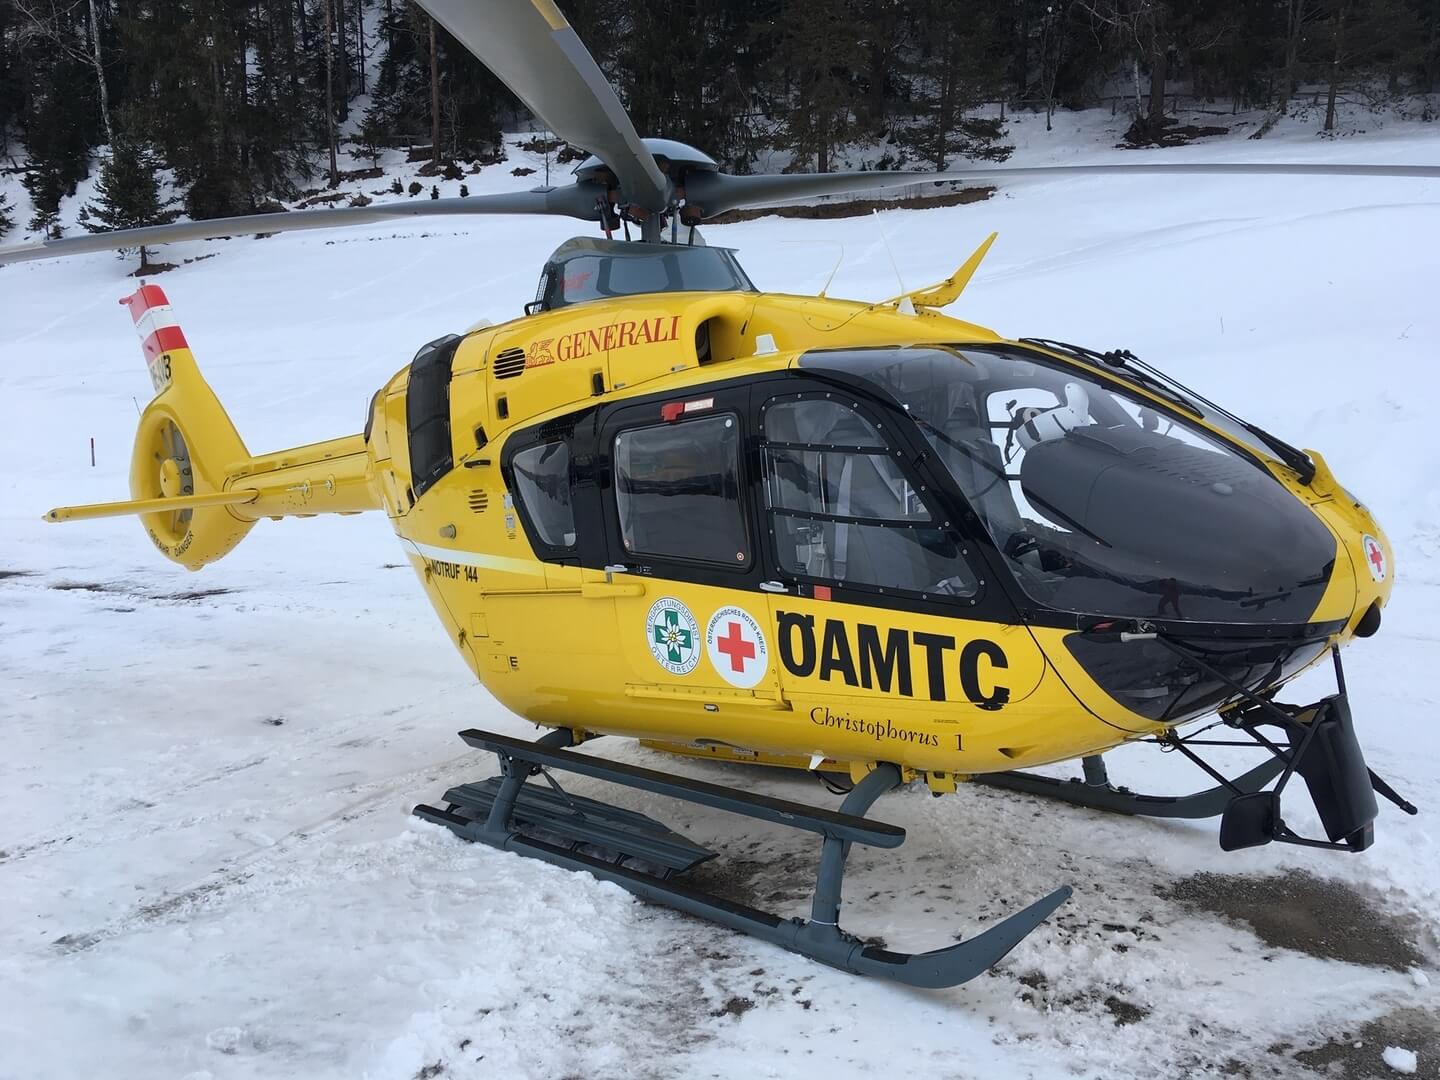 After 2.5 days of test flights, the finished H135 helicopter returned to service on Feb. 5 in Innsbruck as Christophorus 1. OAMTC Photo